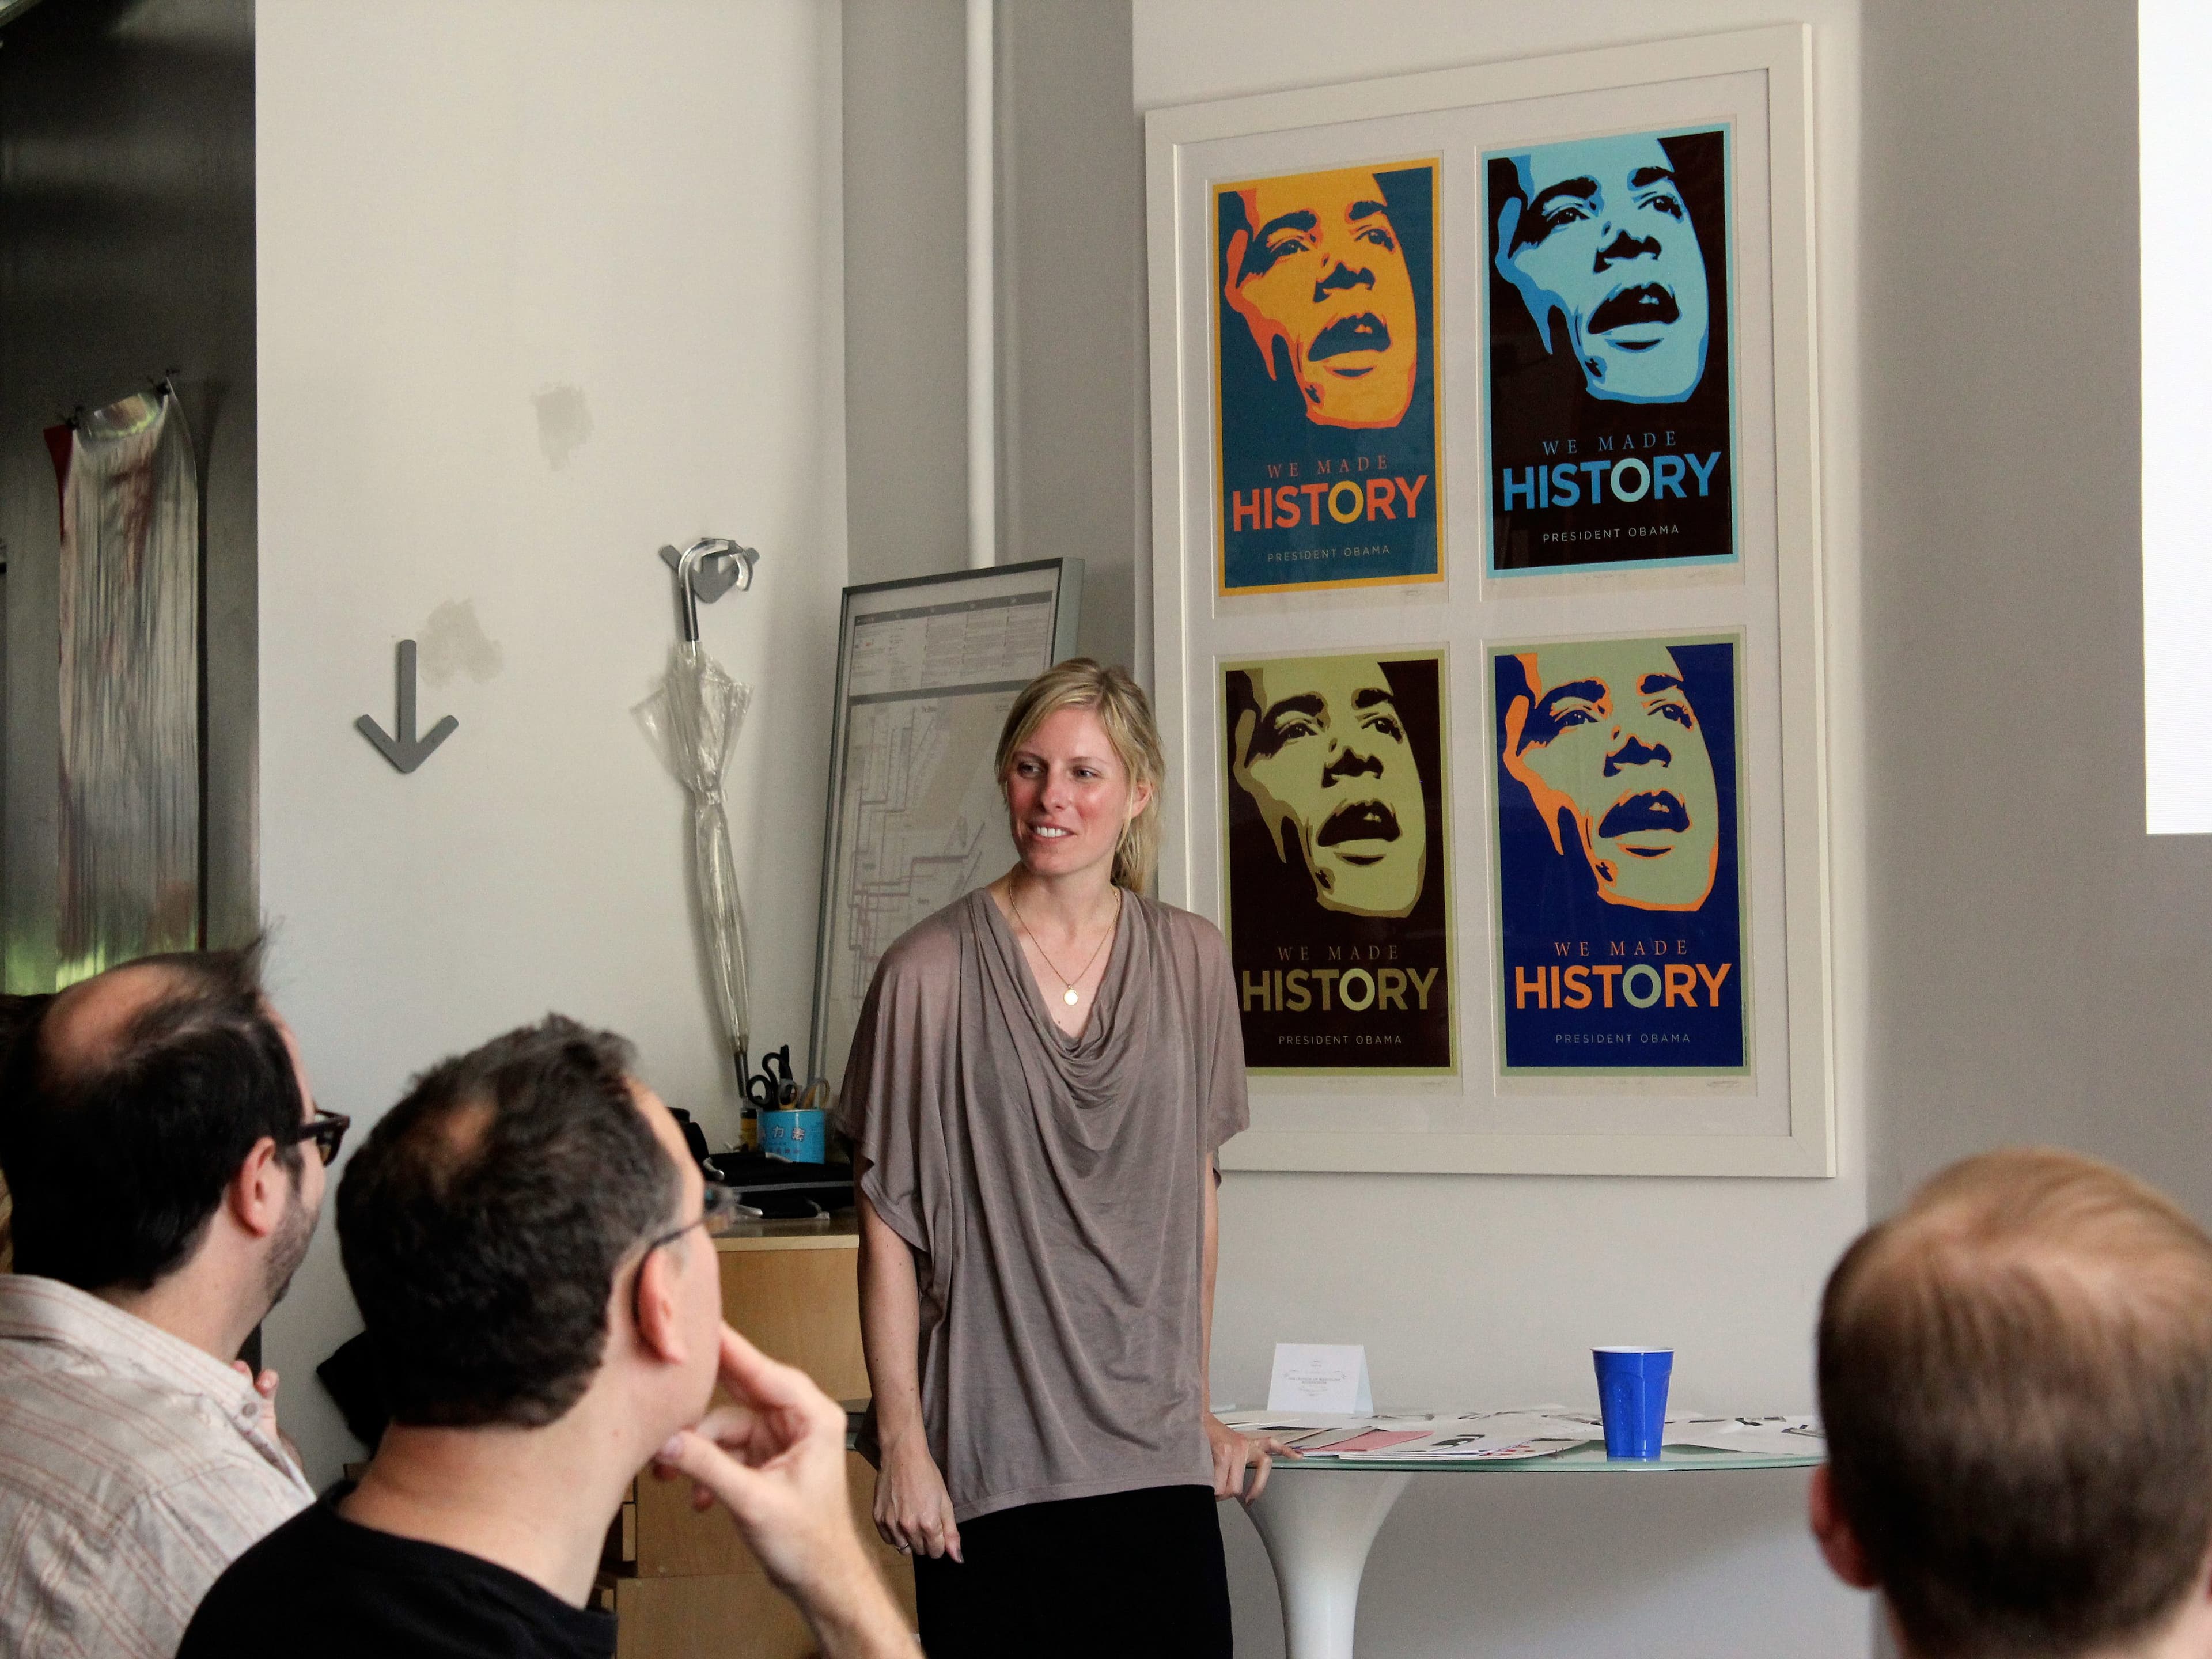 A woman stands in front of a group of seated people, giving a presentation. Behind her on the wall are four framed posters with the phrase "We Made History" and stylized images of a man. A blue cup and some papers are on the table beside her.